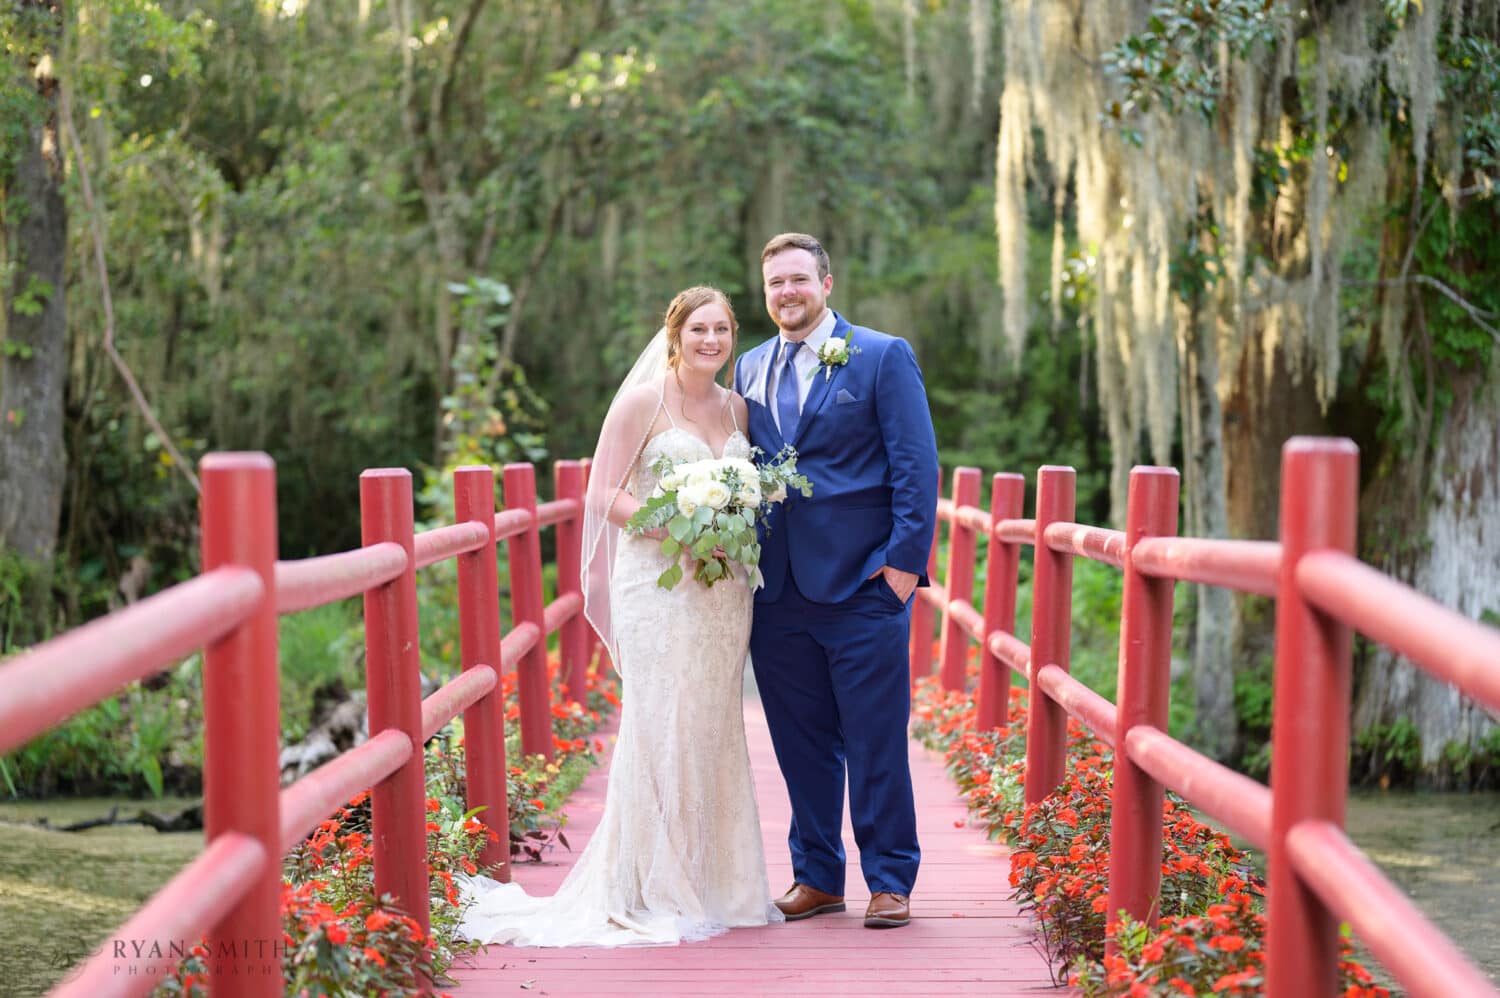 Portraits of the bride and groom on the red bridge - Magnolia Plantation